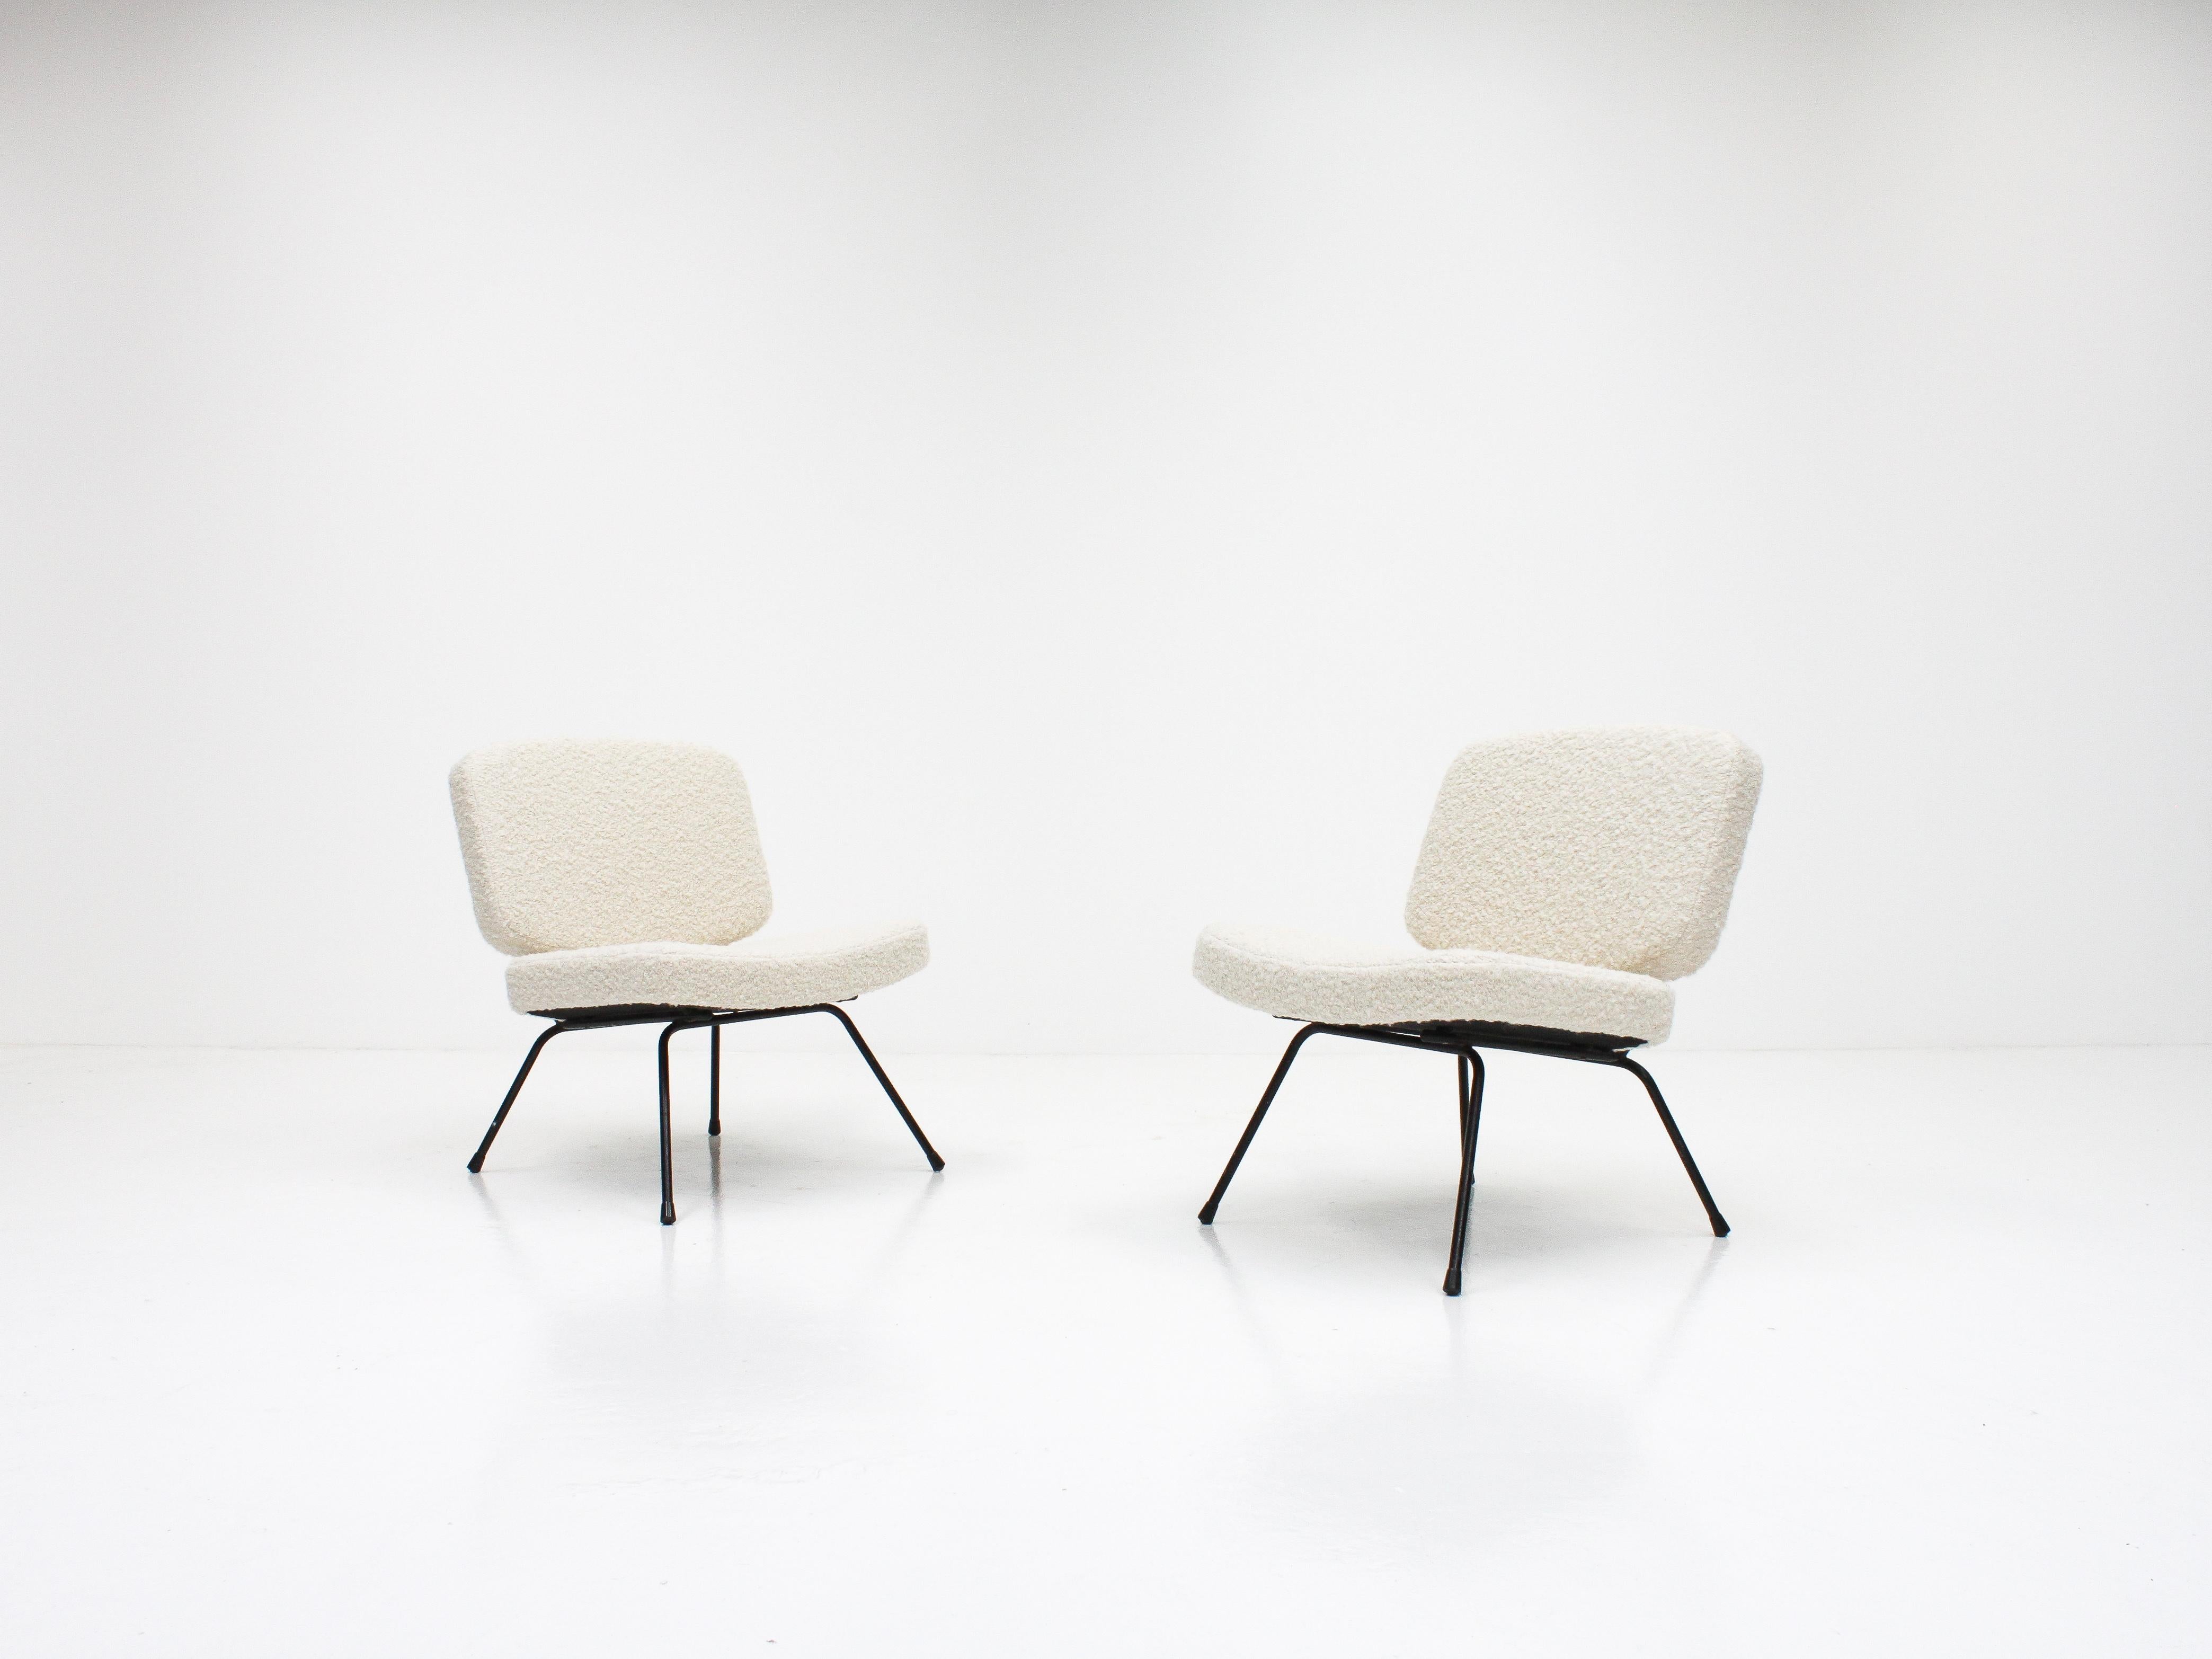 A pair of Pierre Paulin CM 190 lounge chairs, newly upholstered in soft heavy loop wool, mohair and alpaca fabric which is produced by one of the most luxurious fabric manufacturers in the world, Pierre Frey.

Manufactured in the 1950s by